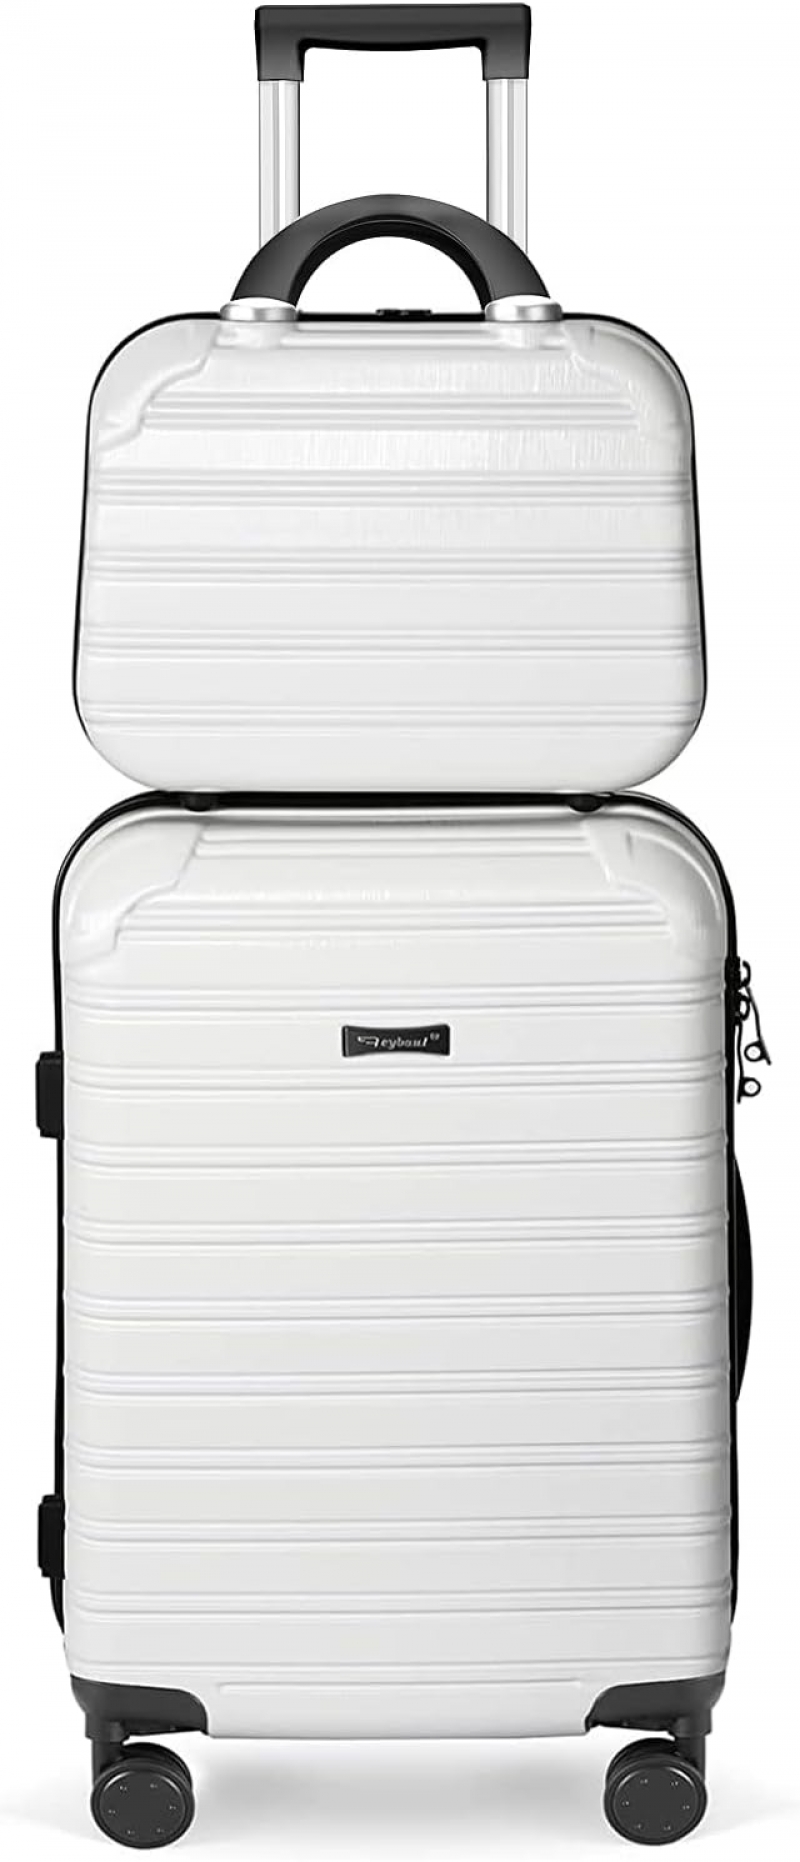 ihocon: Luggage Set 2PCS Suitcase PC+ABS Carry On Luggage with Spinner Wheels, White 2-Piece Set(14/20) (968) 行李箱套裝 2件組